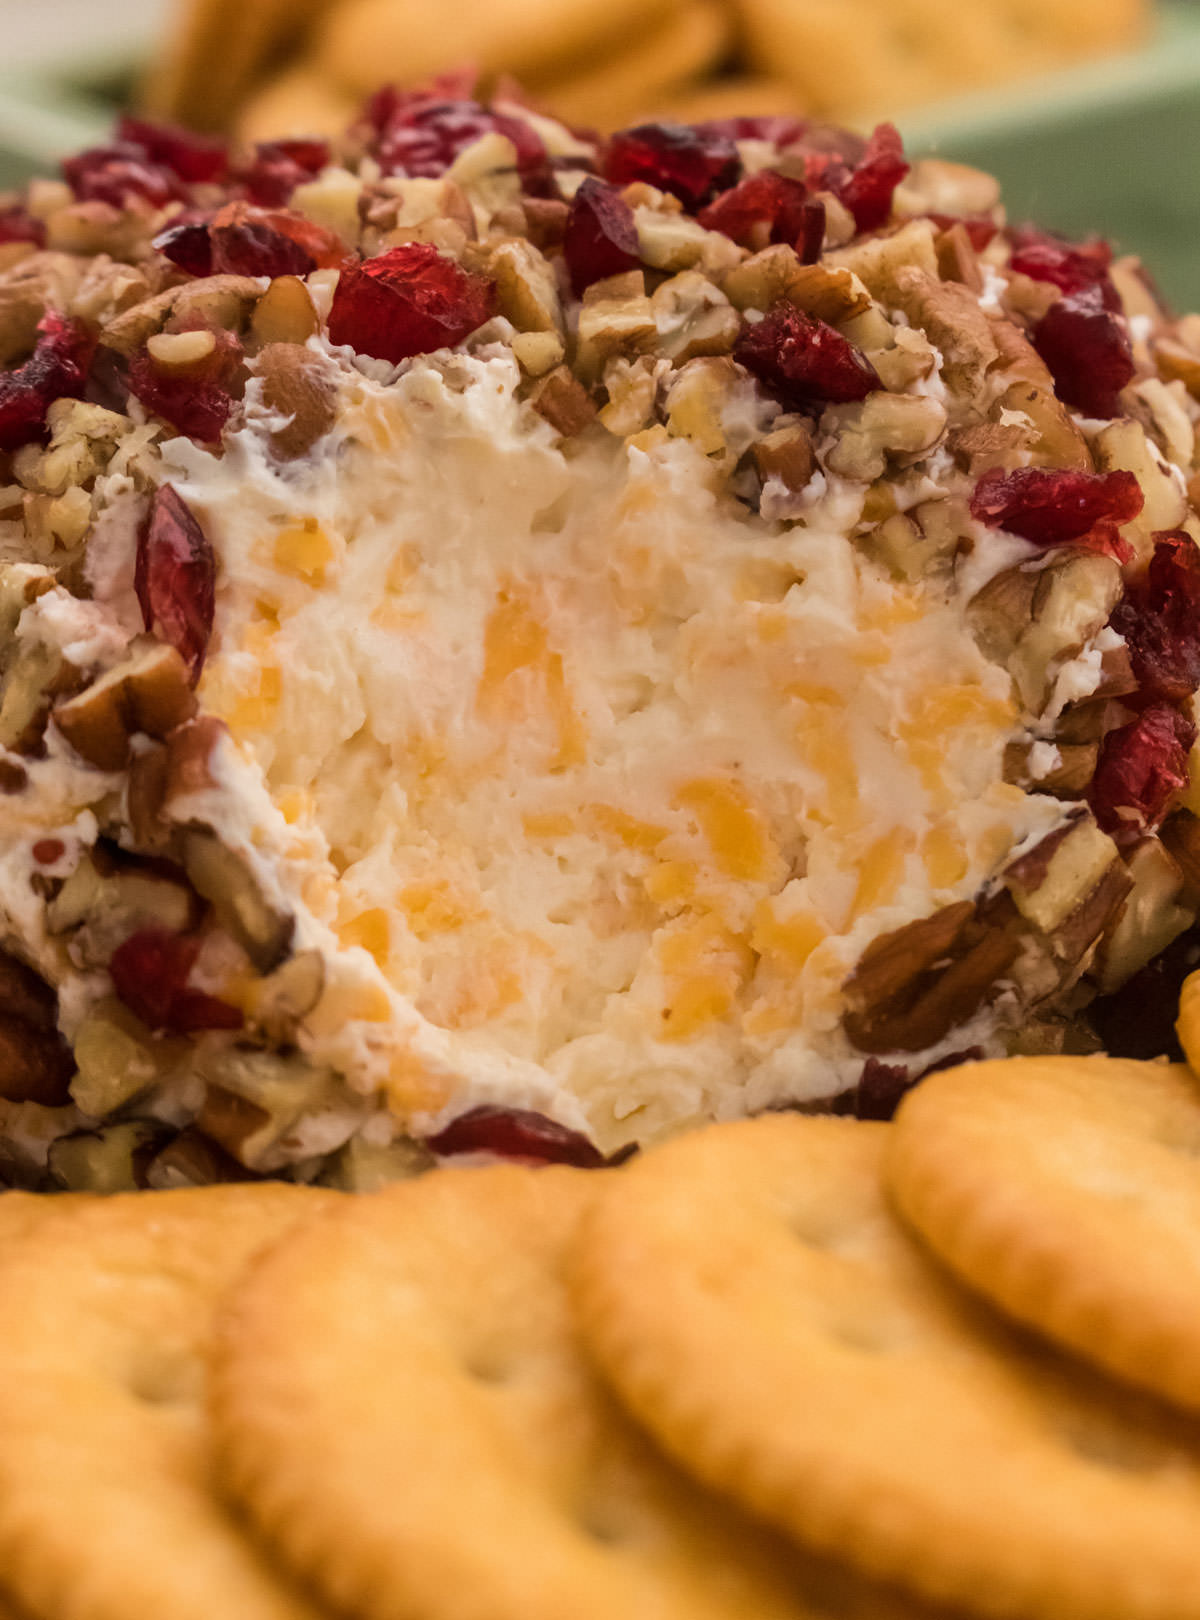 Cranberry Pecan Cheese Ball with the cheese mixture showing sitting in front of a stack of crackers.